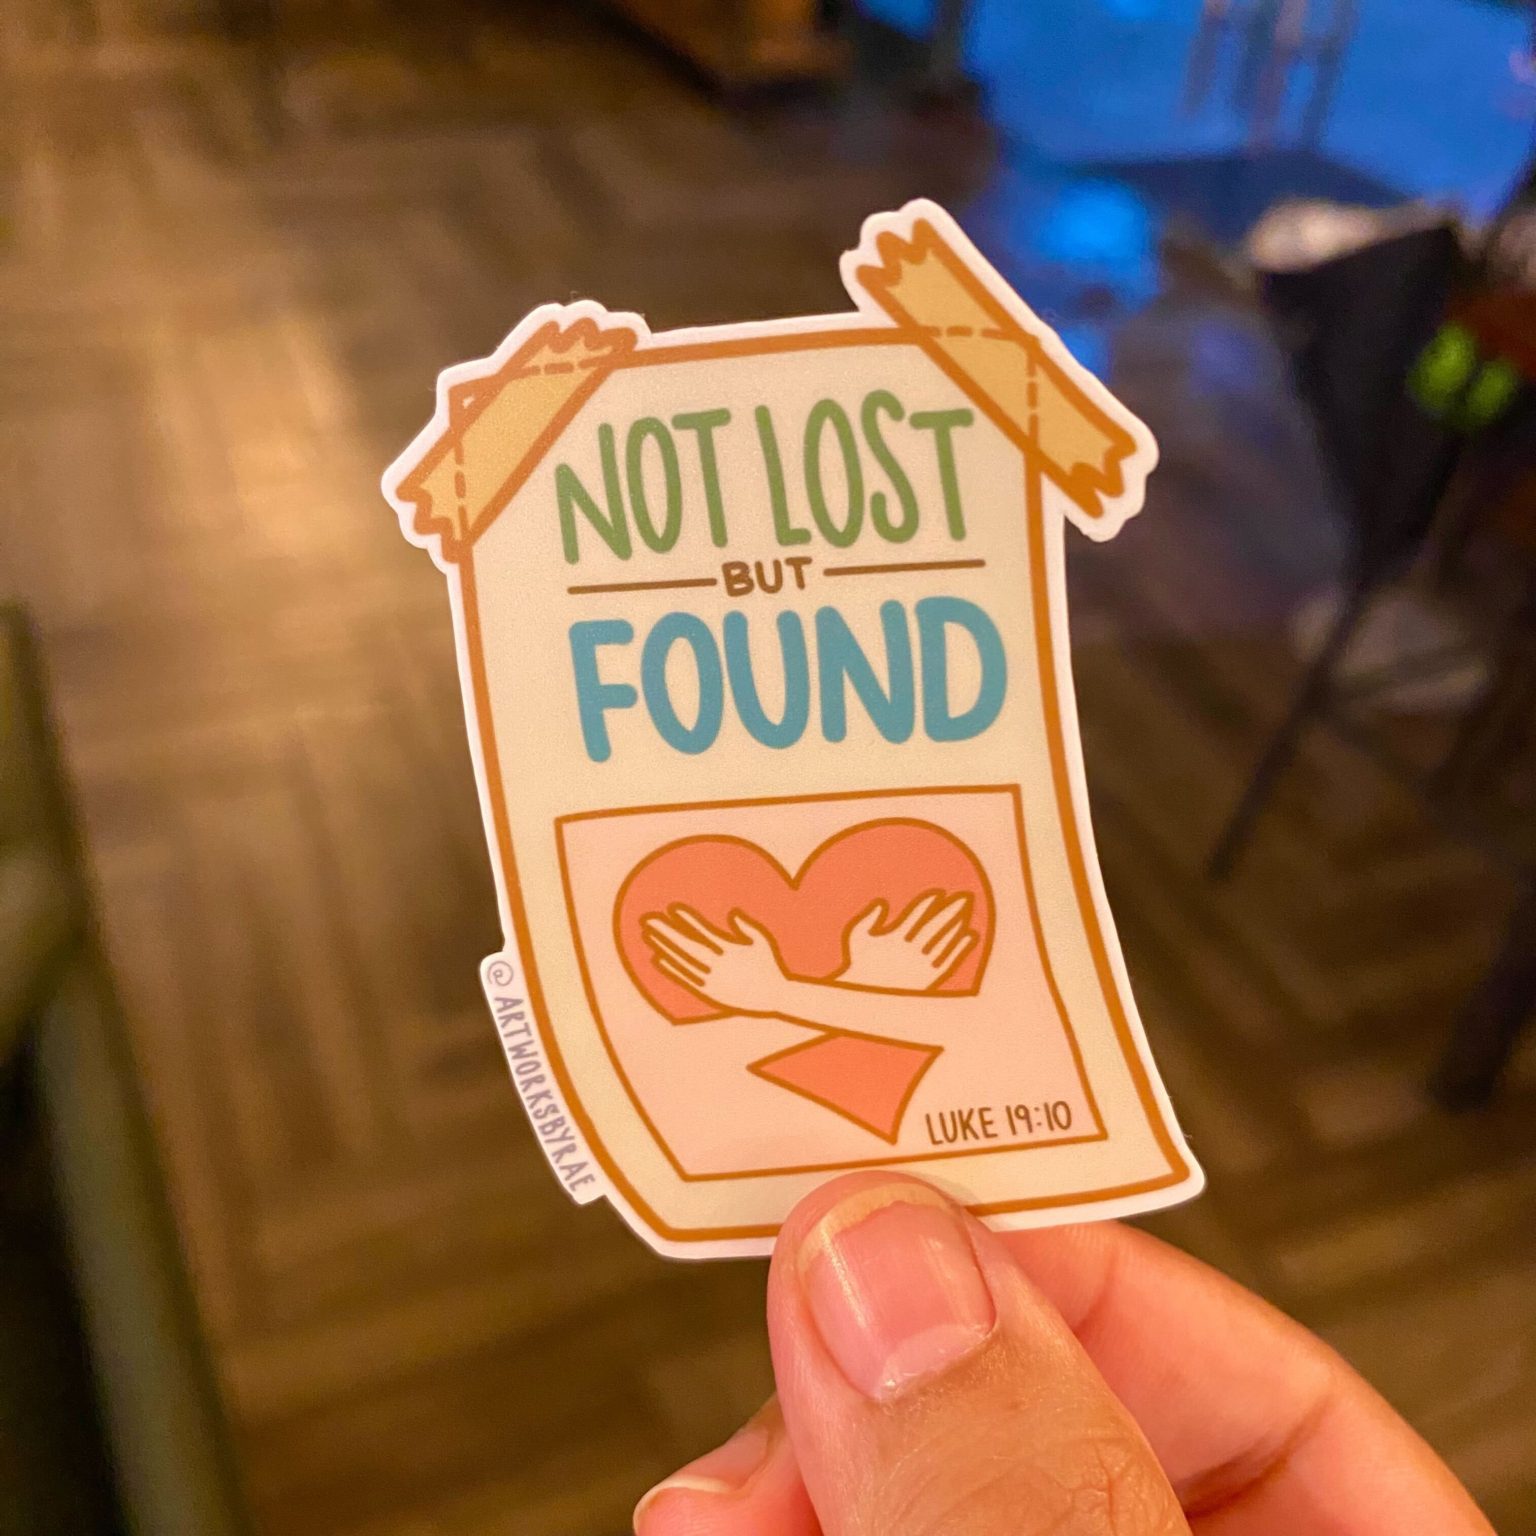 "Not Lost, Found"